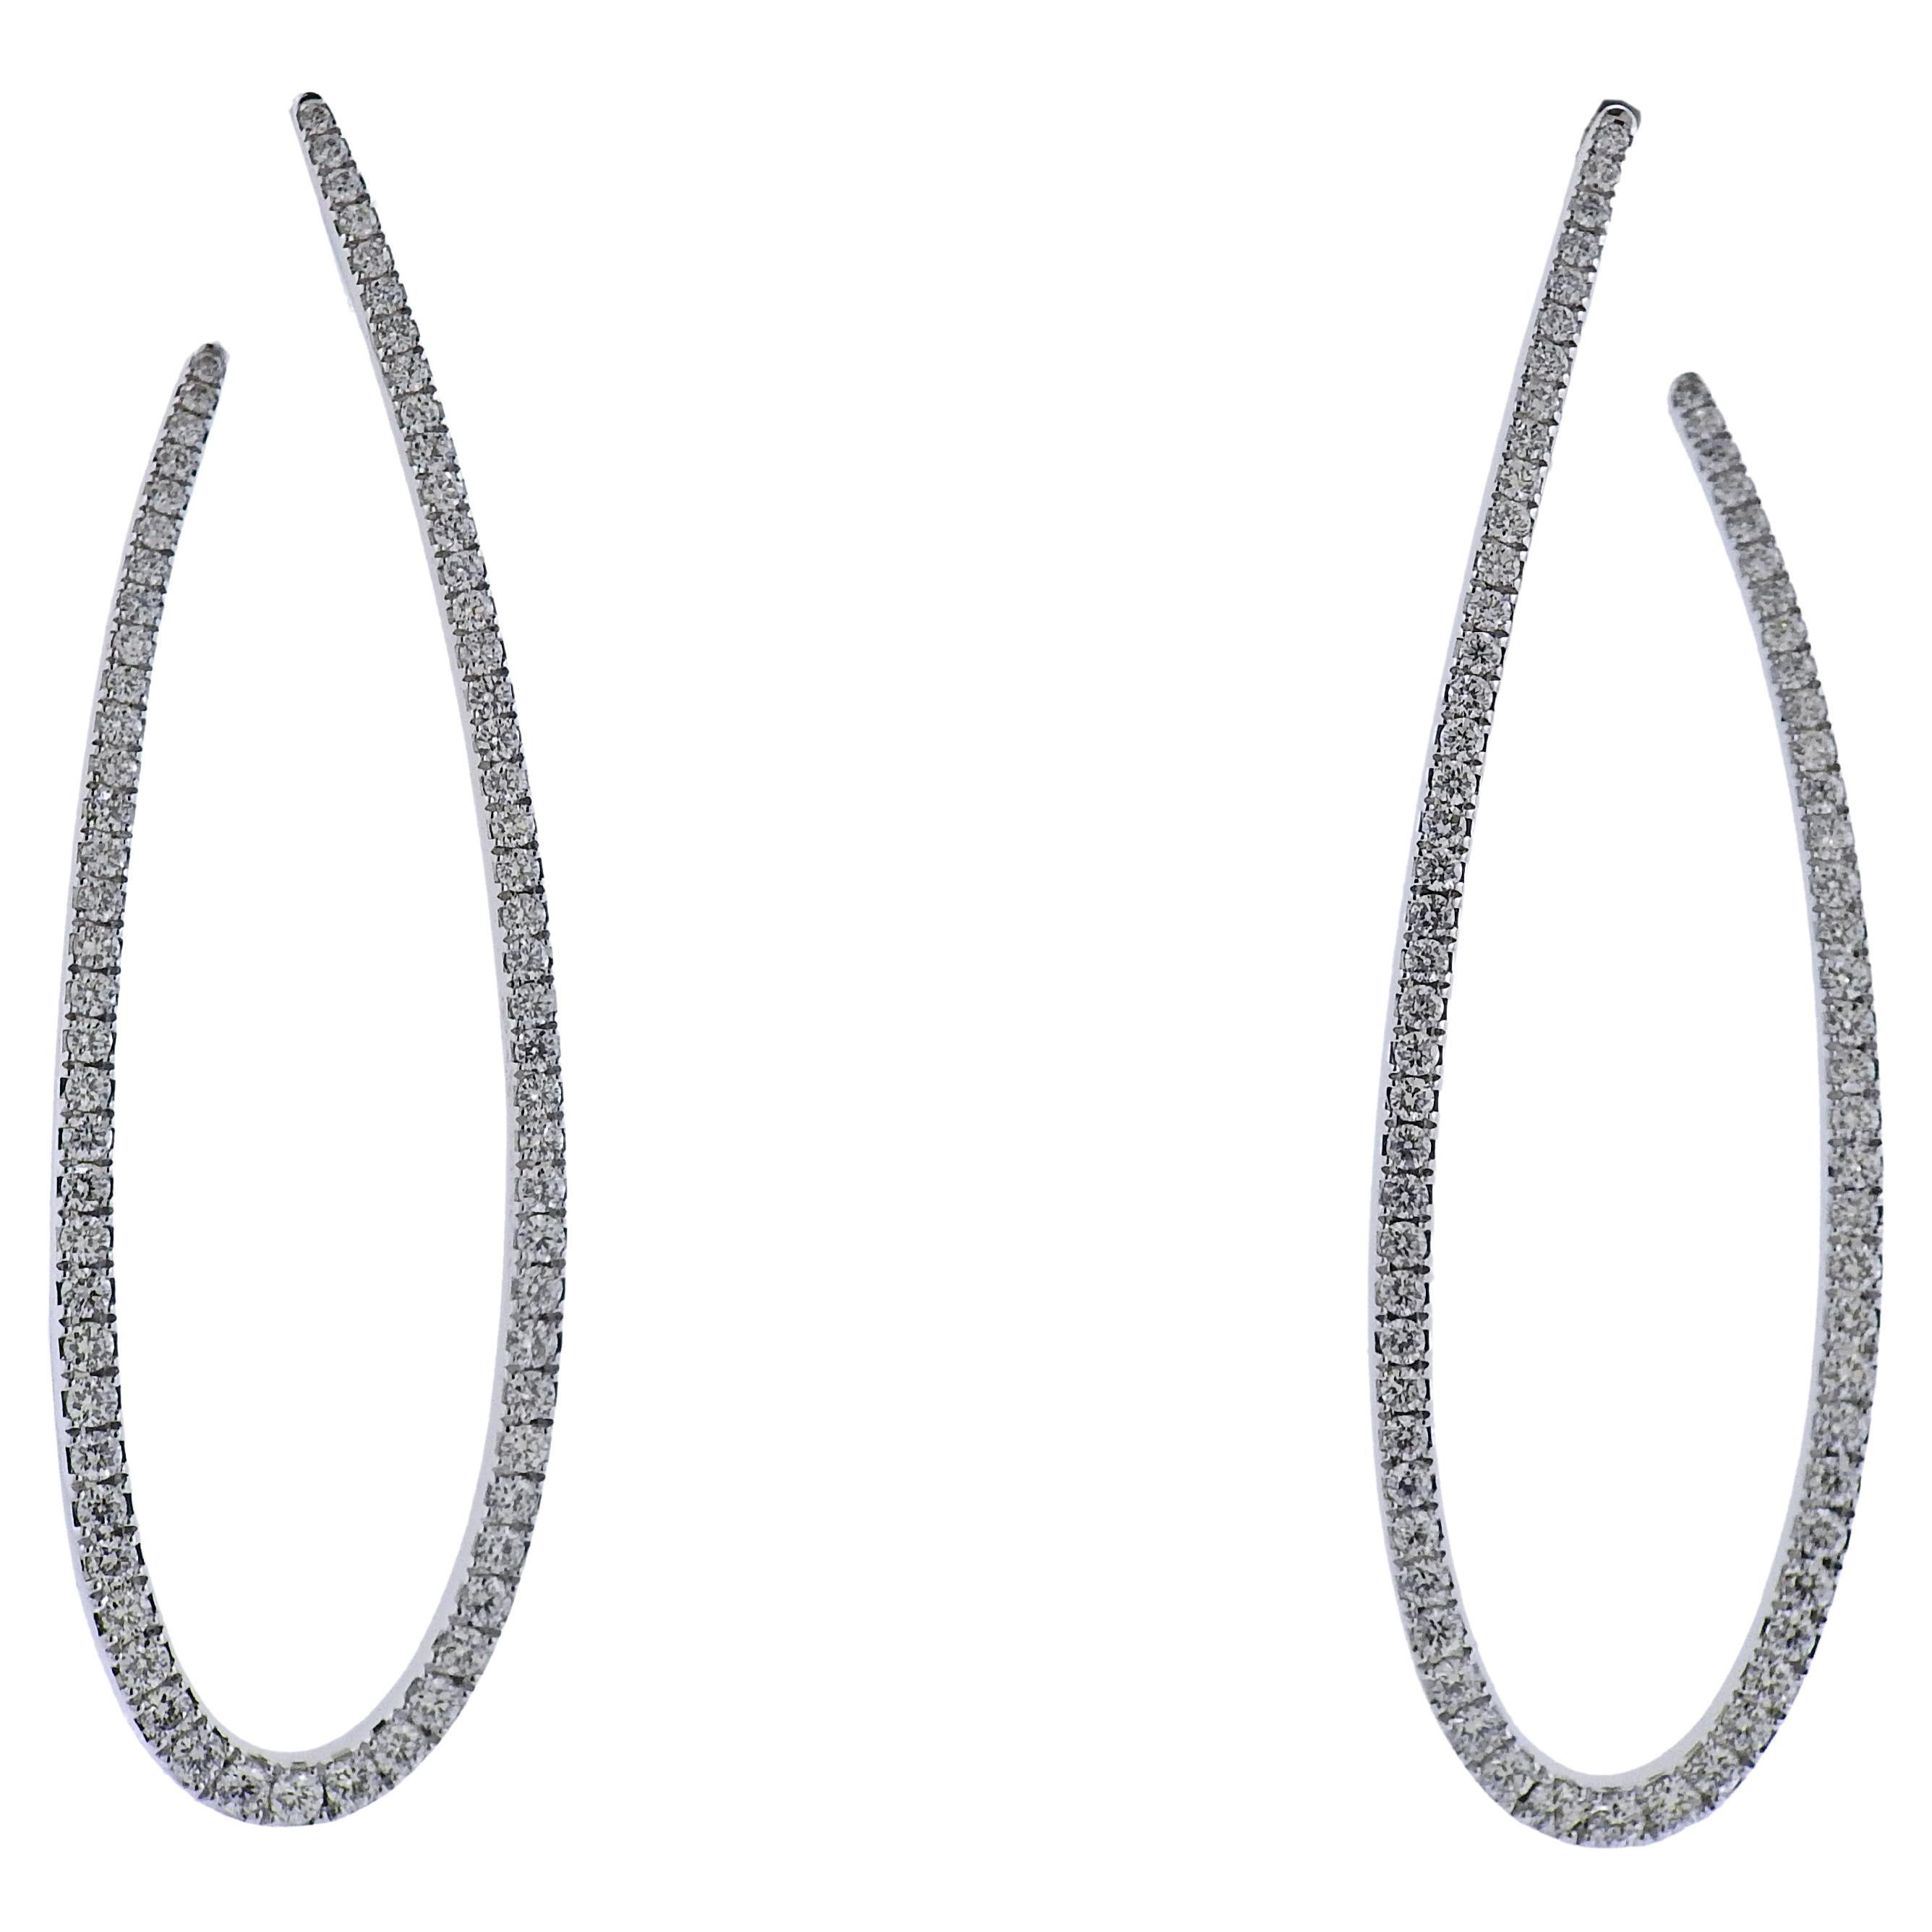 Messika Gatsby White Gold Diamond Earrings For Sale